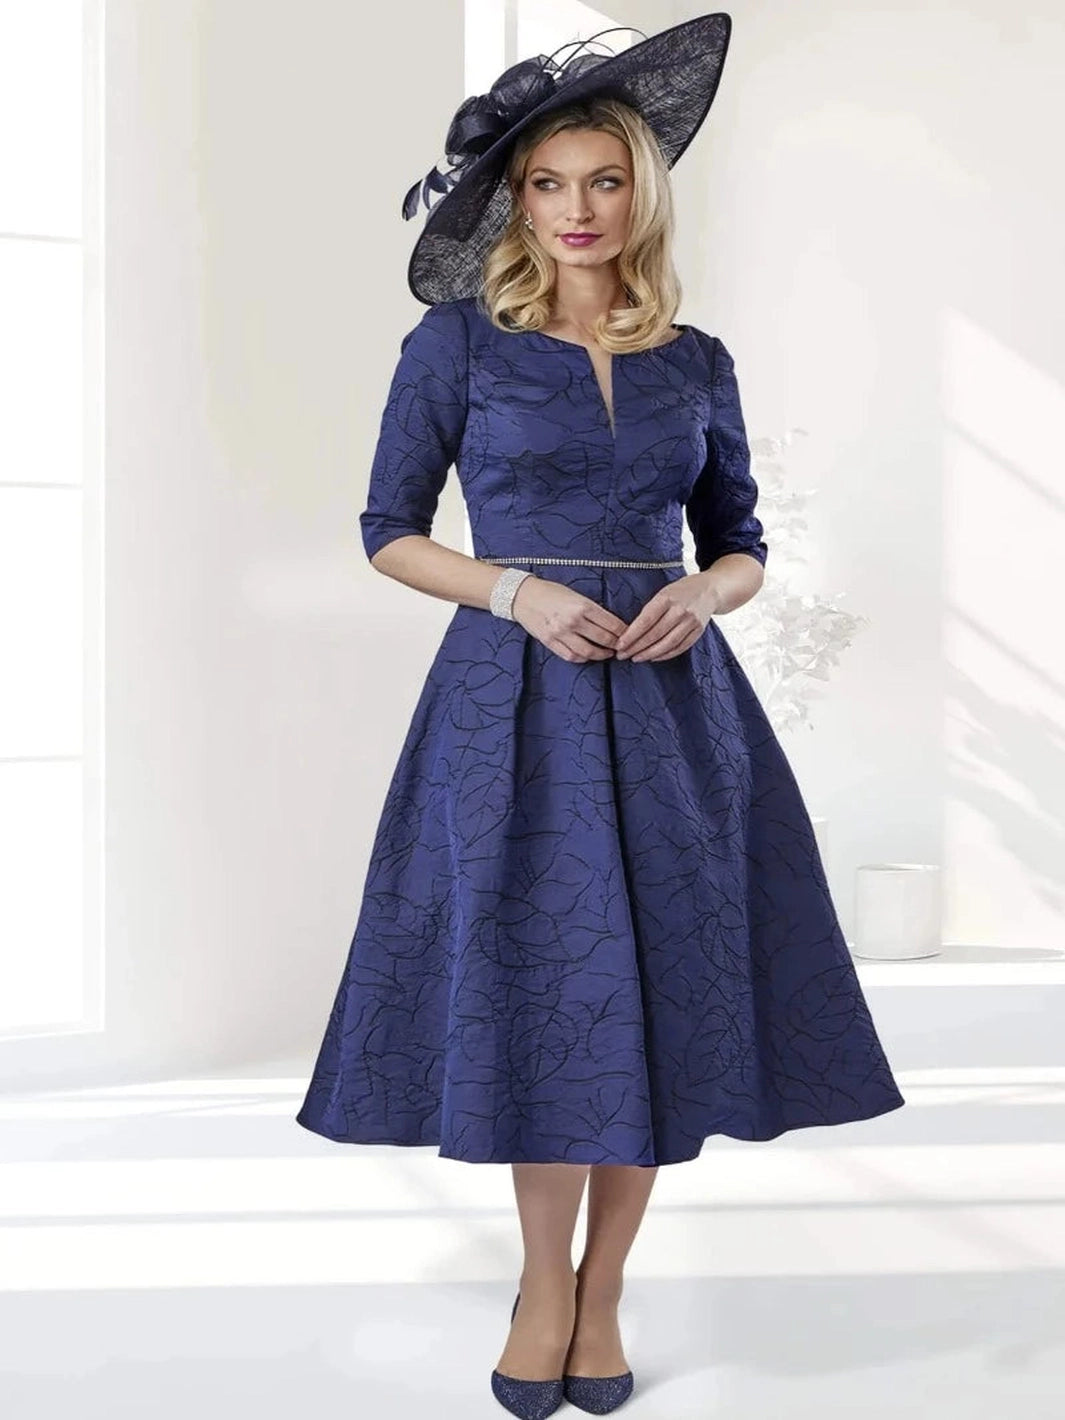 Veromia V08128 - Navy-Mother of the bride- mother of the groom -Nicola Ross